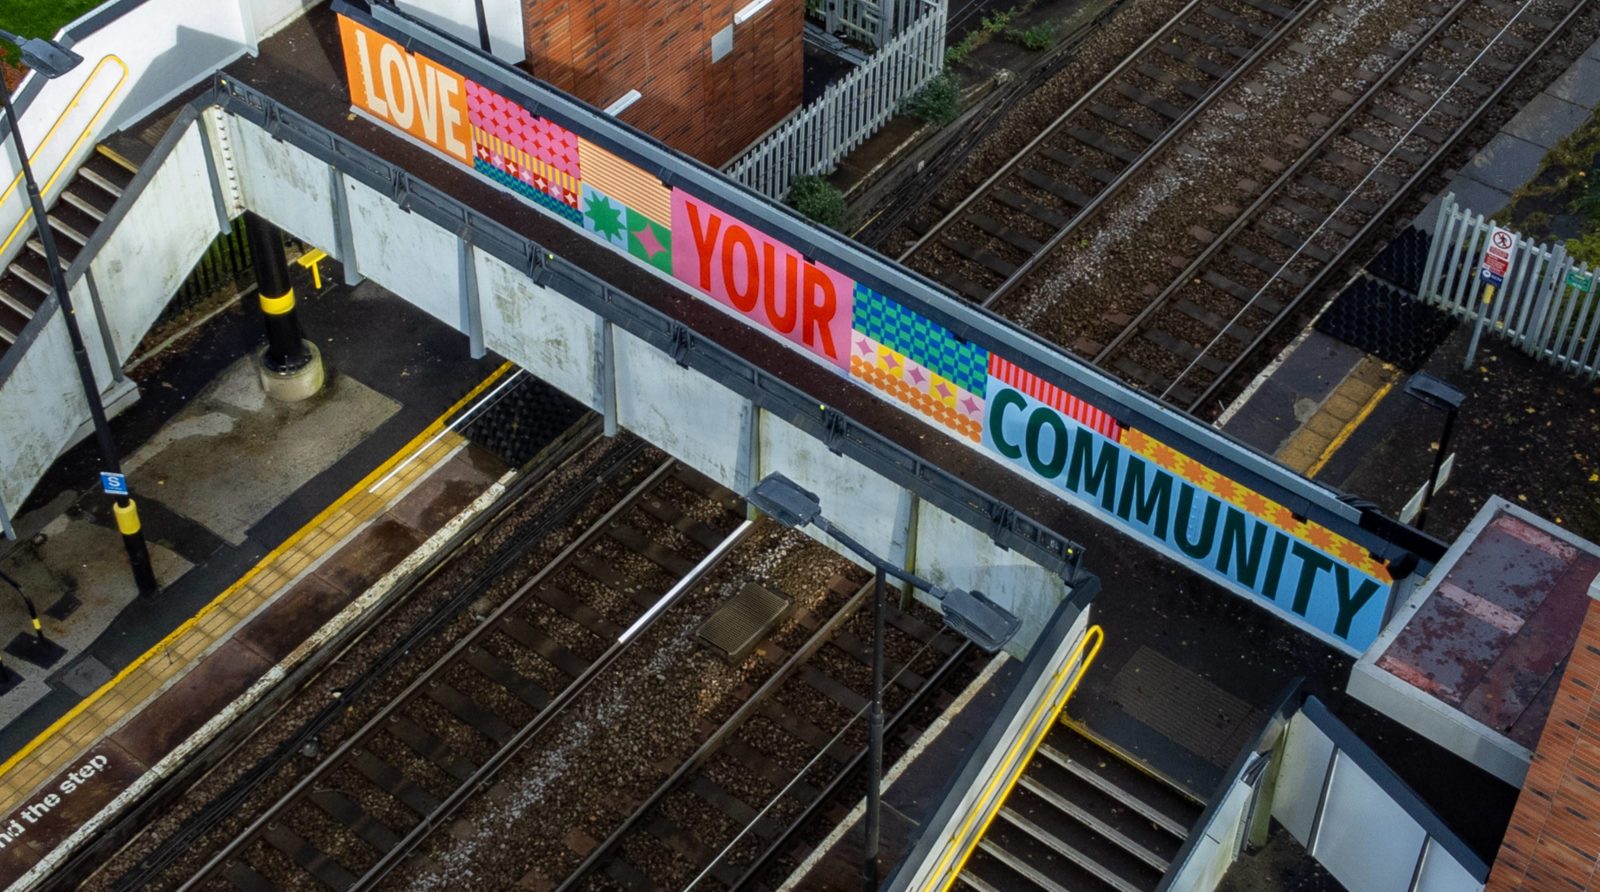 The mural is photographed at an arial view, it reads 'Love Your Community', surrounded by pattern and is painted on a train station bridge.